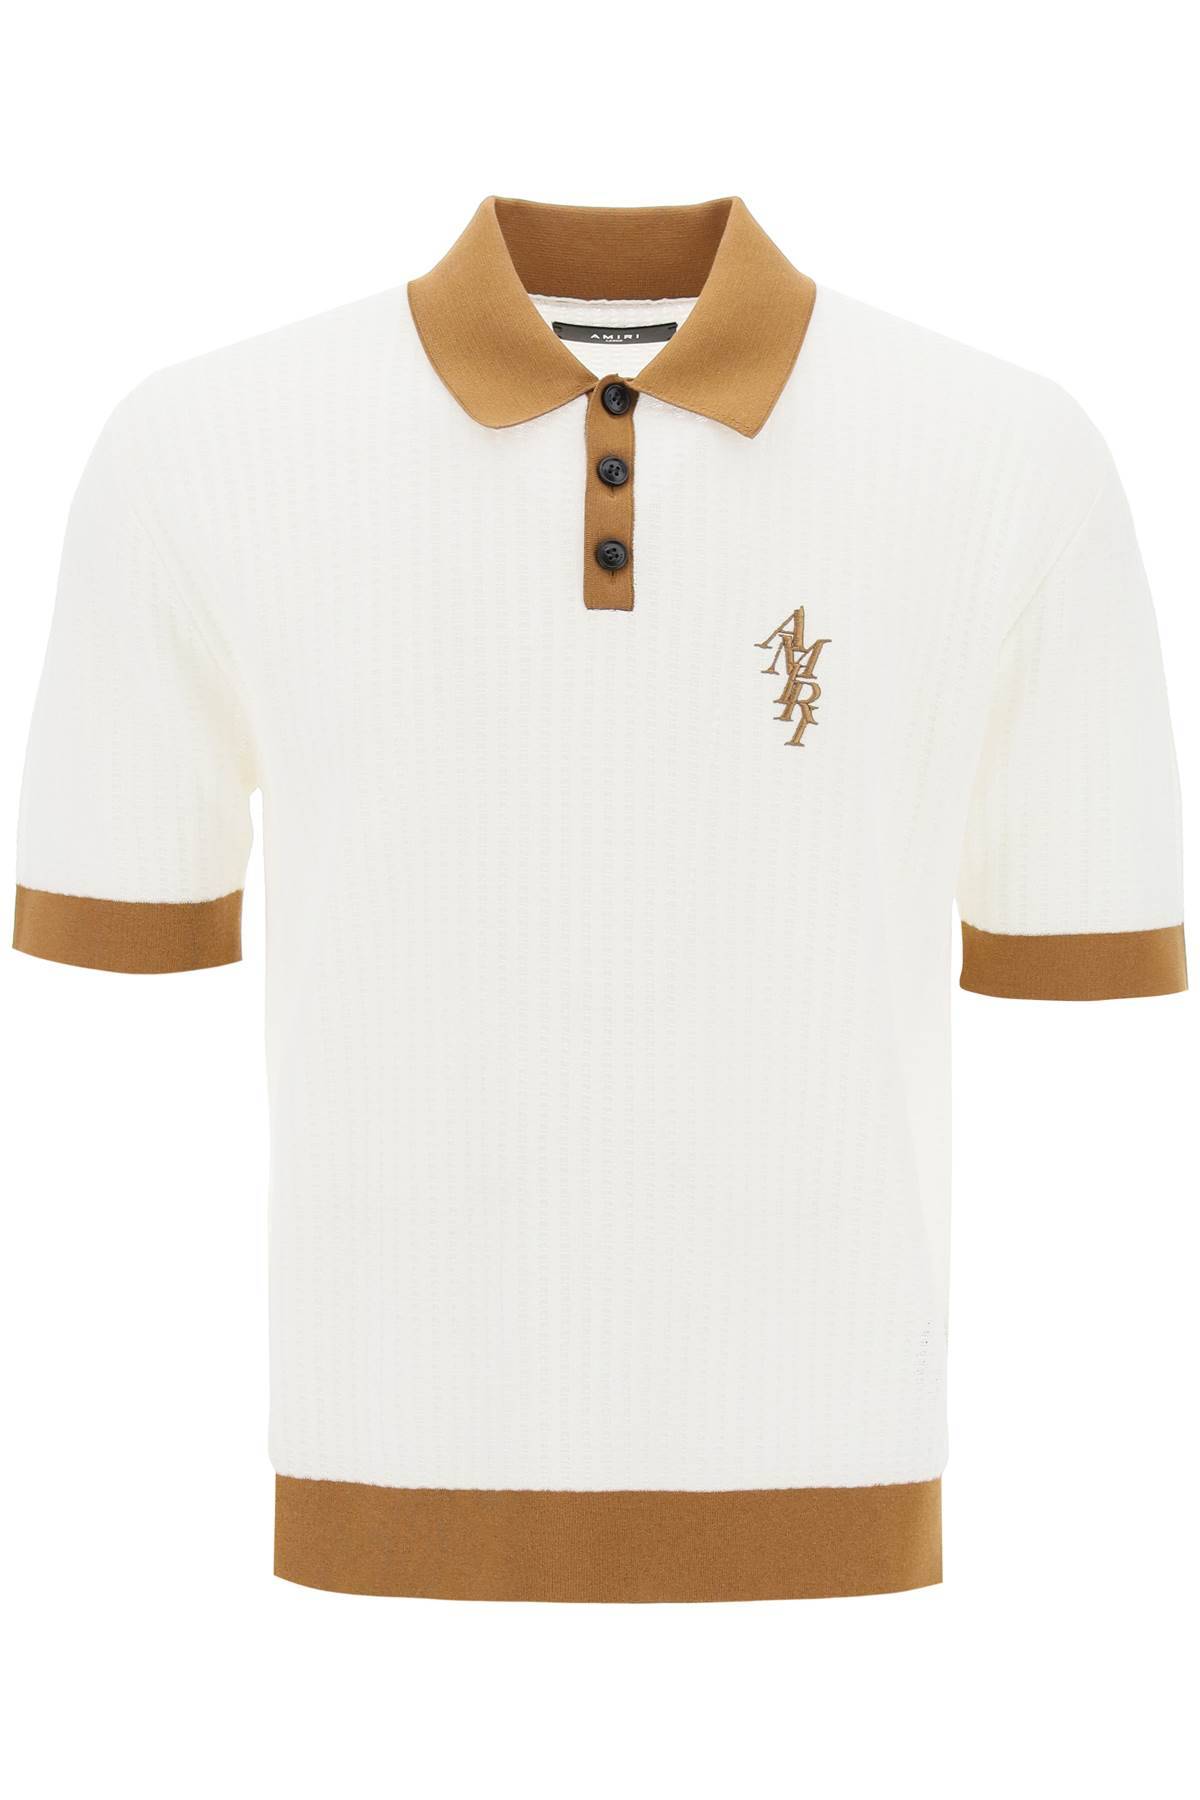 Amiri AMIRI polo shirt with contrasting edges and embroidered logo